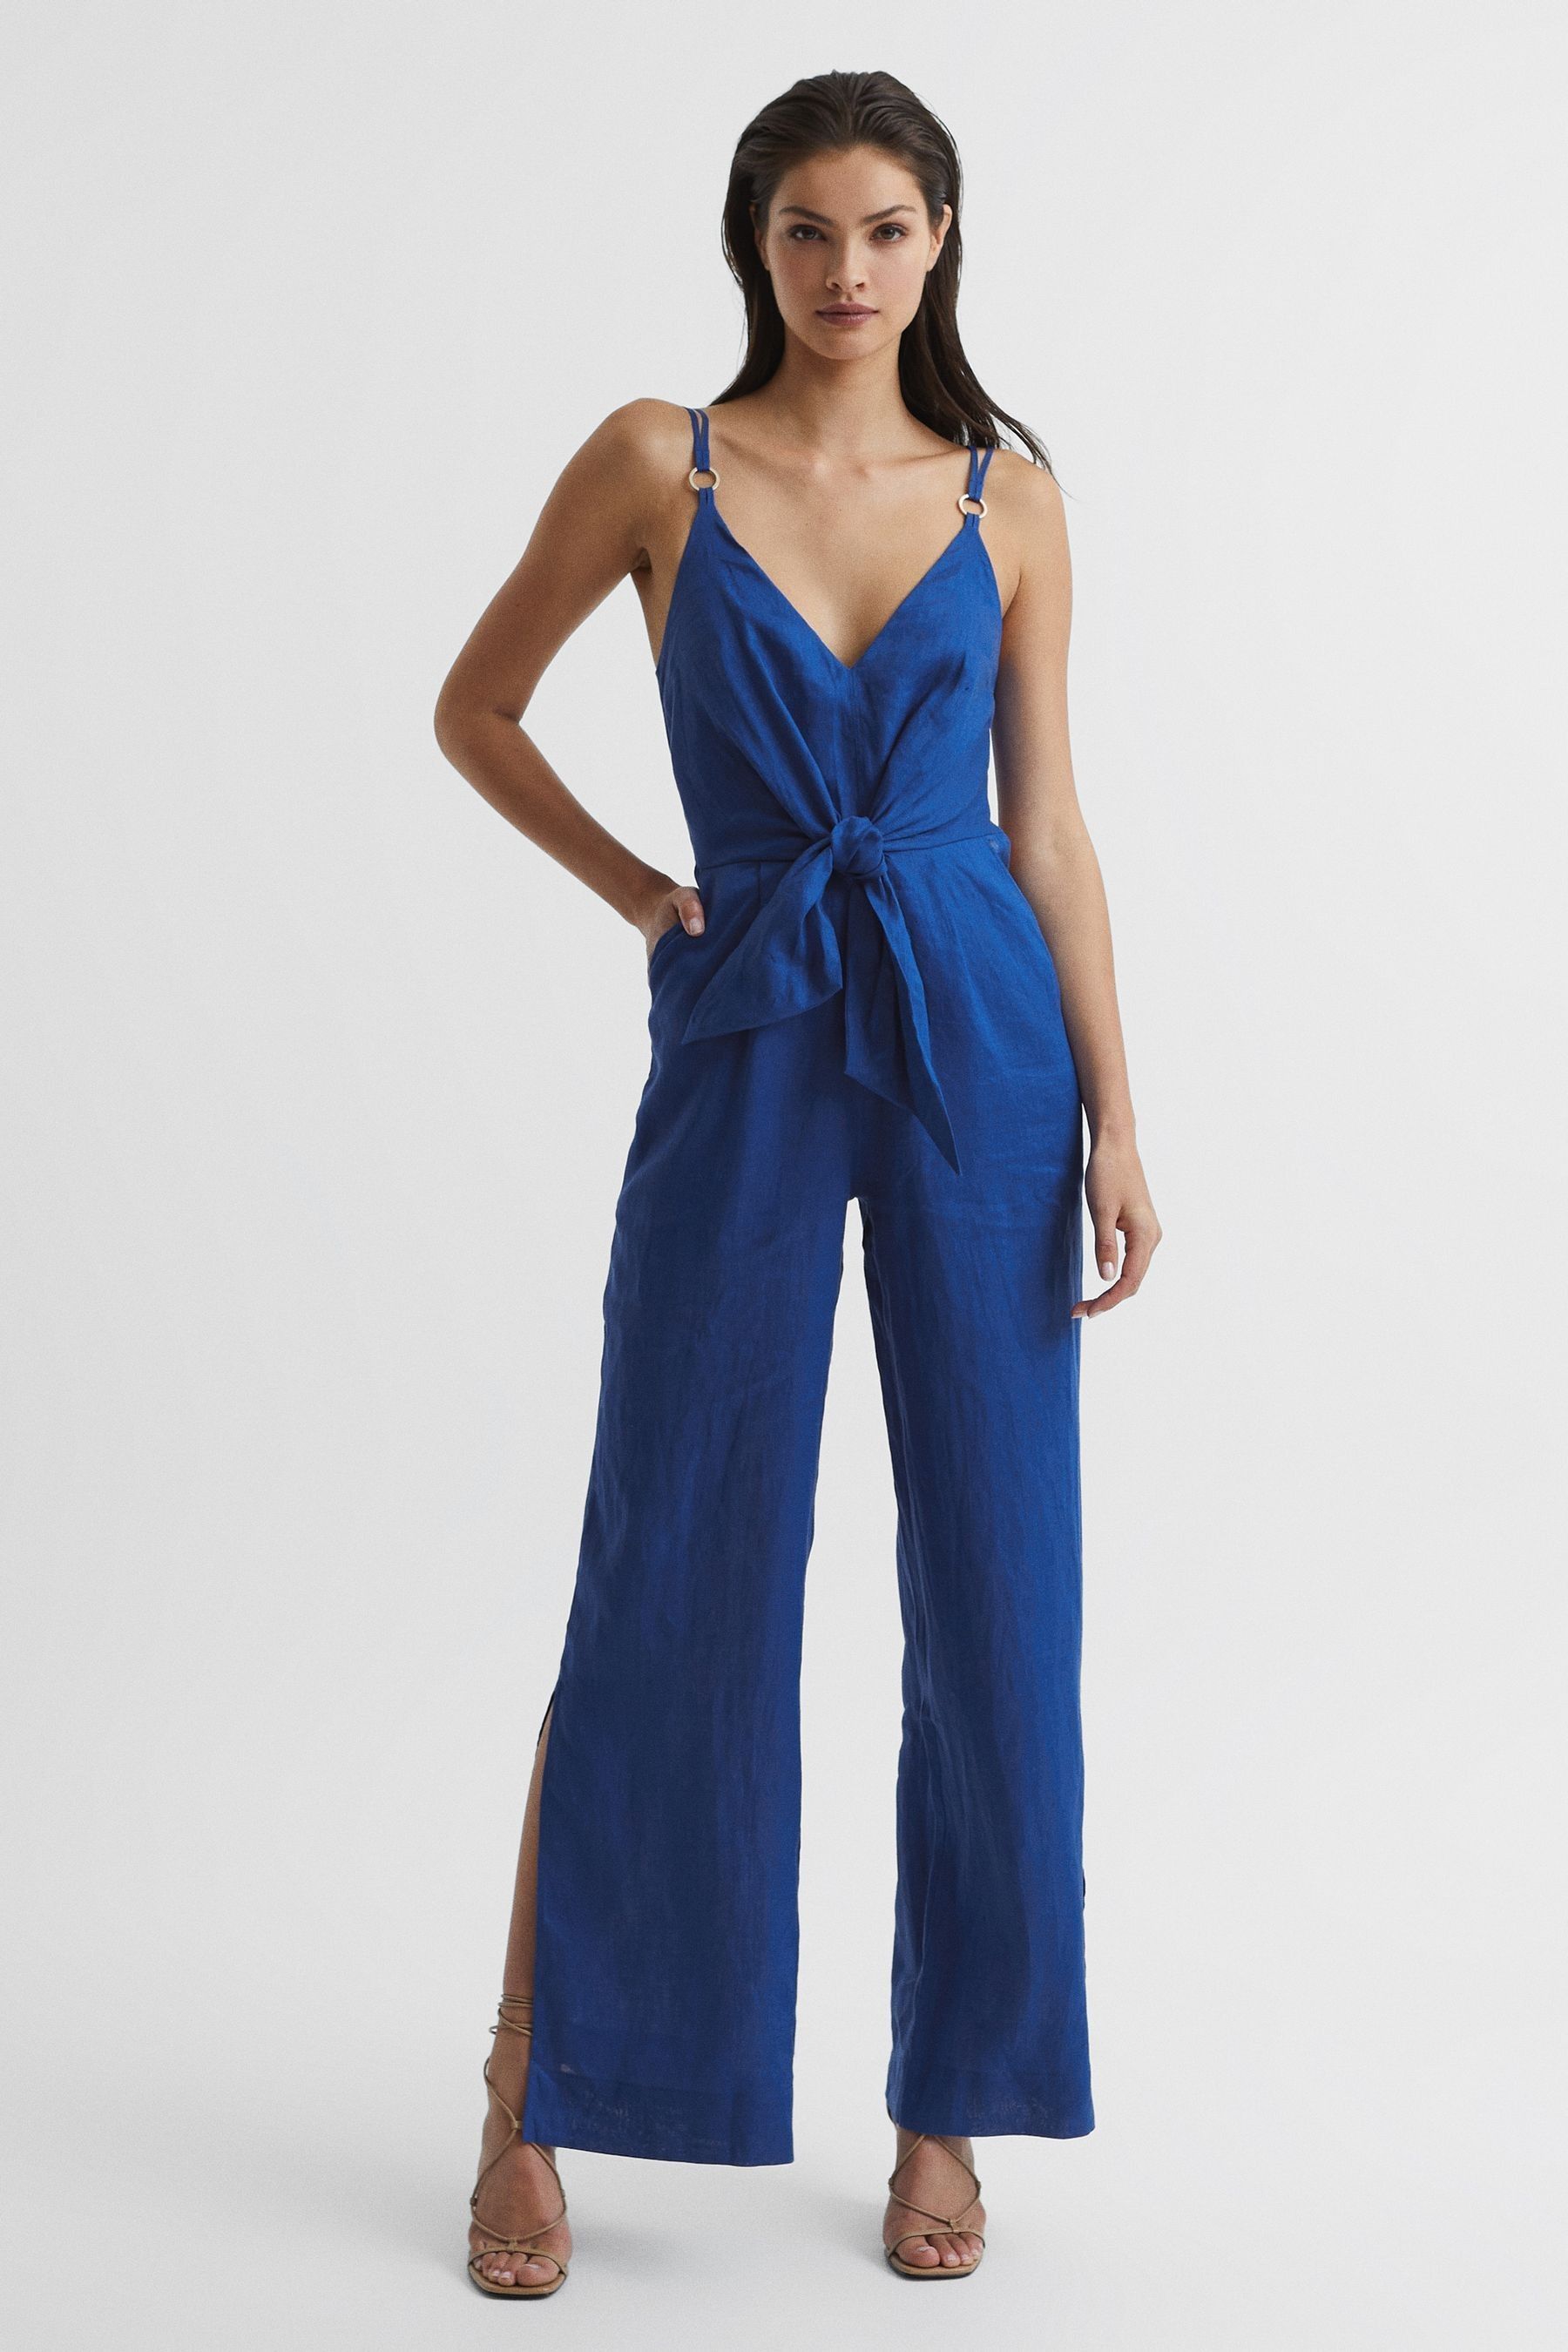 Buy Reiss Bright Blue Ana Linen Jumpsuit from the Next UK online shop